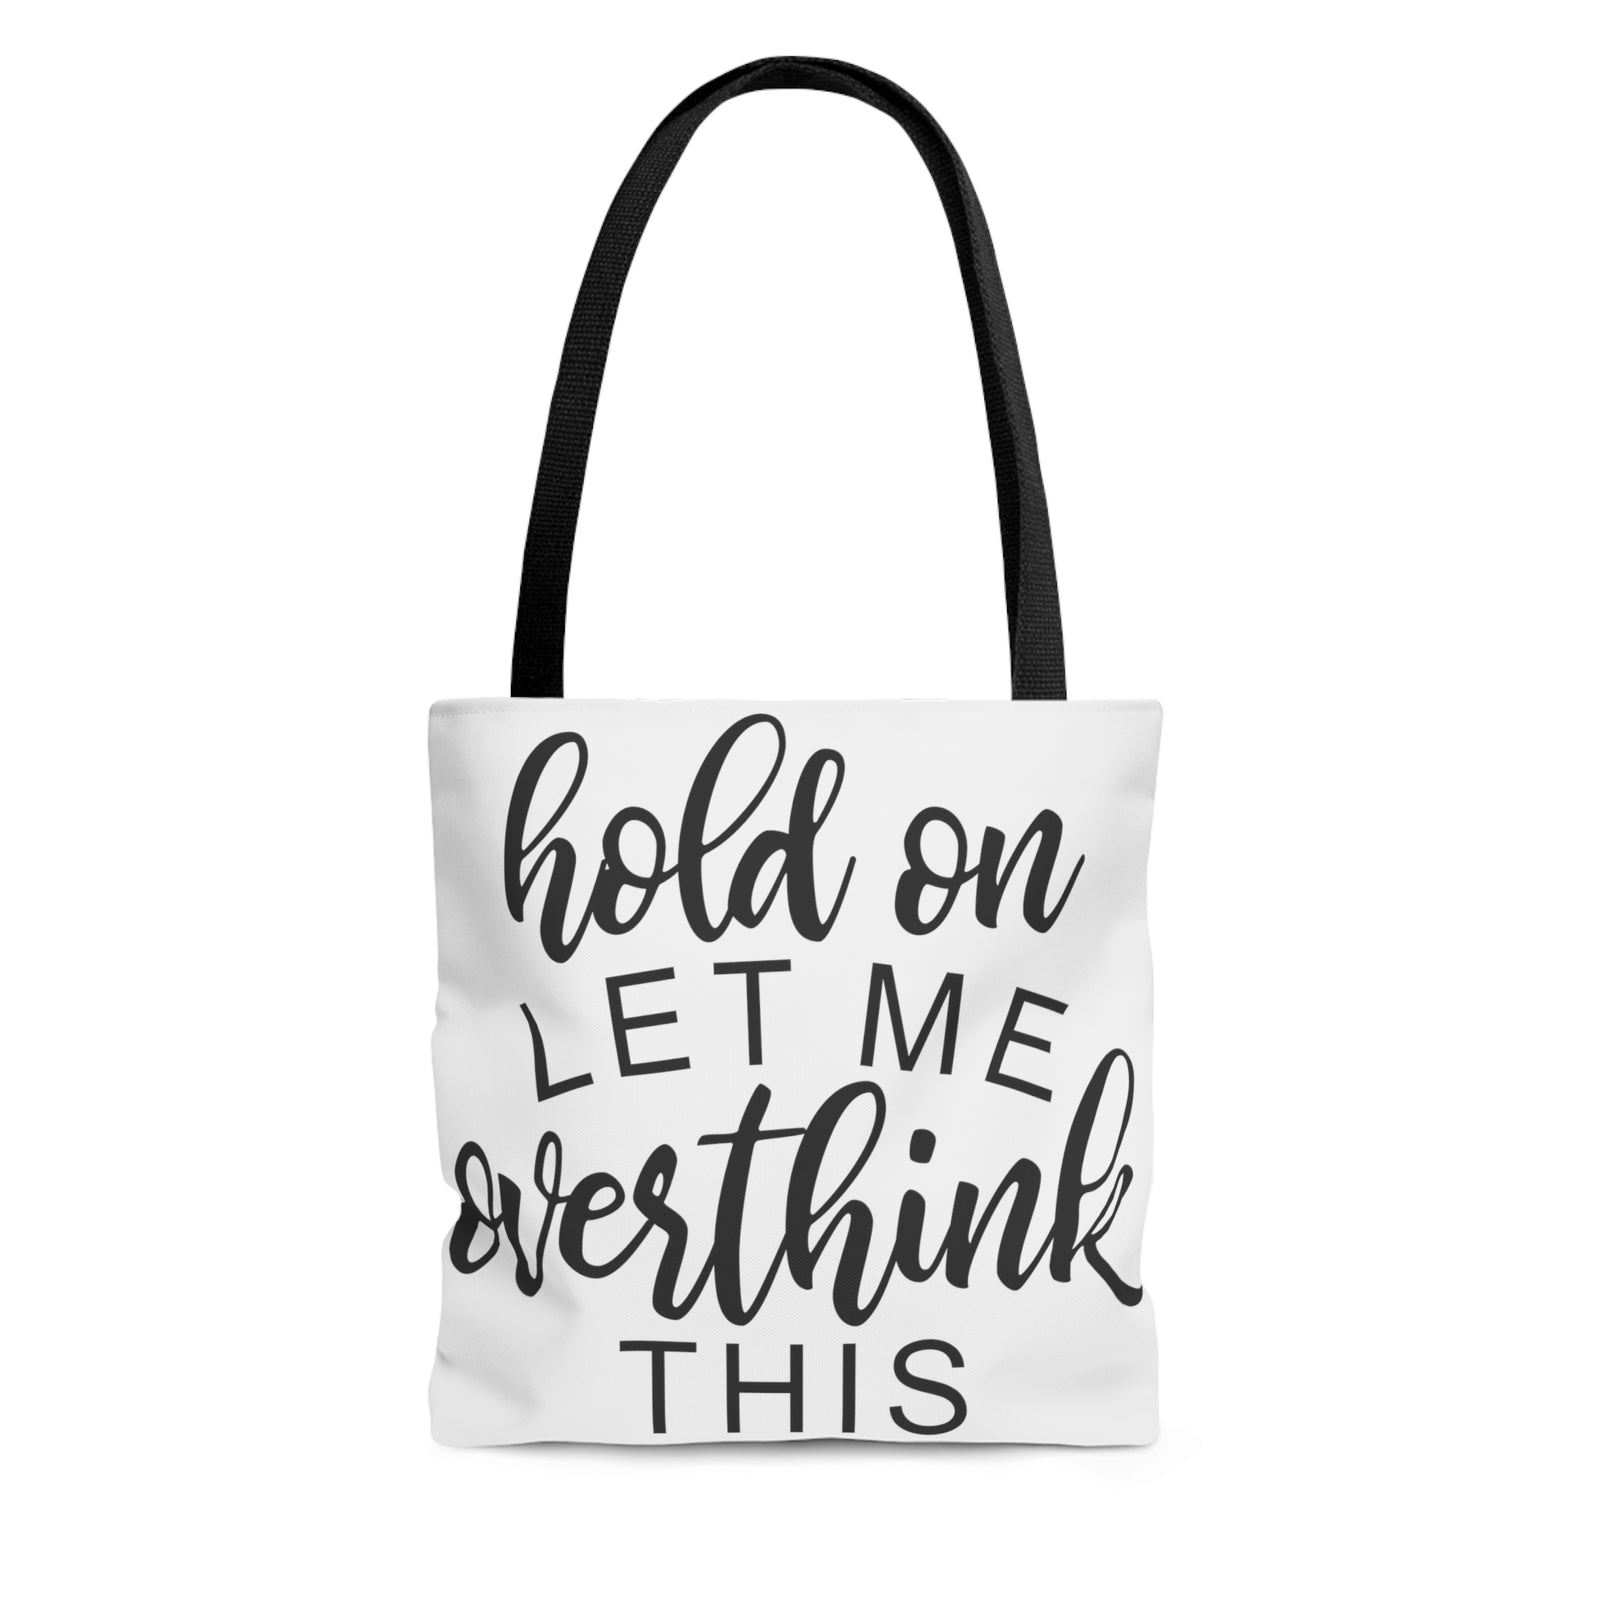 Overthink This - Tote Bag - Sarcasm Swag